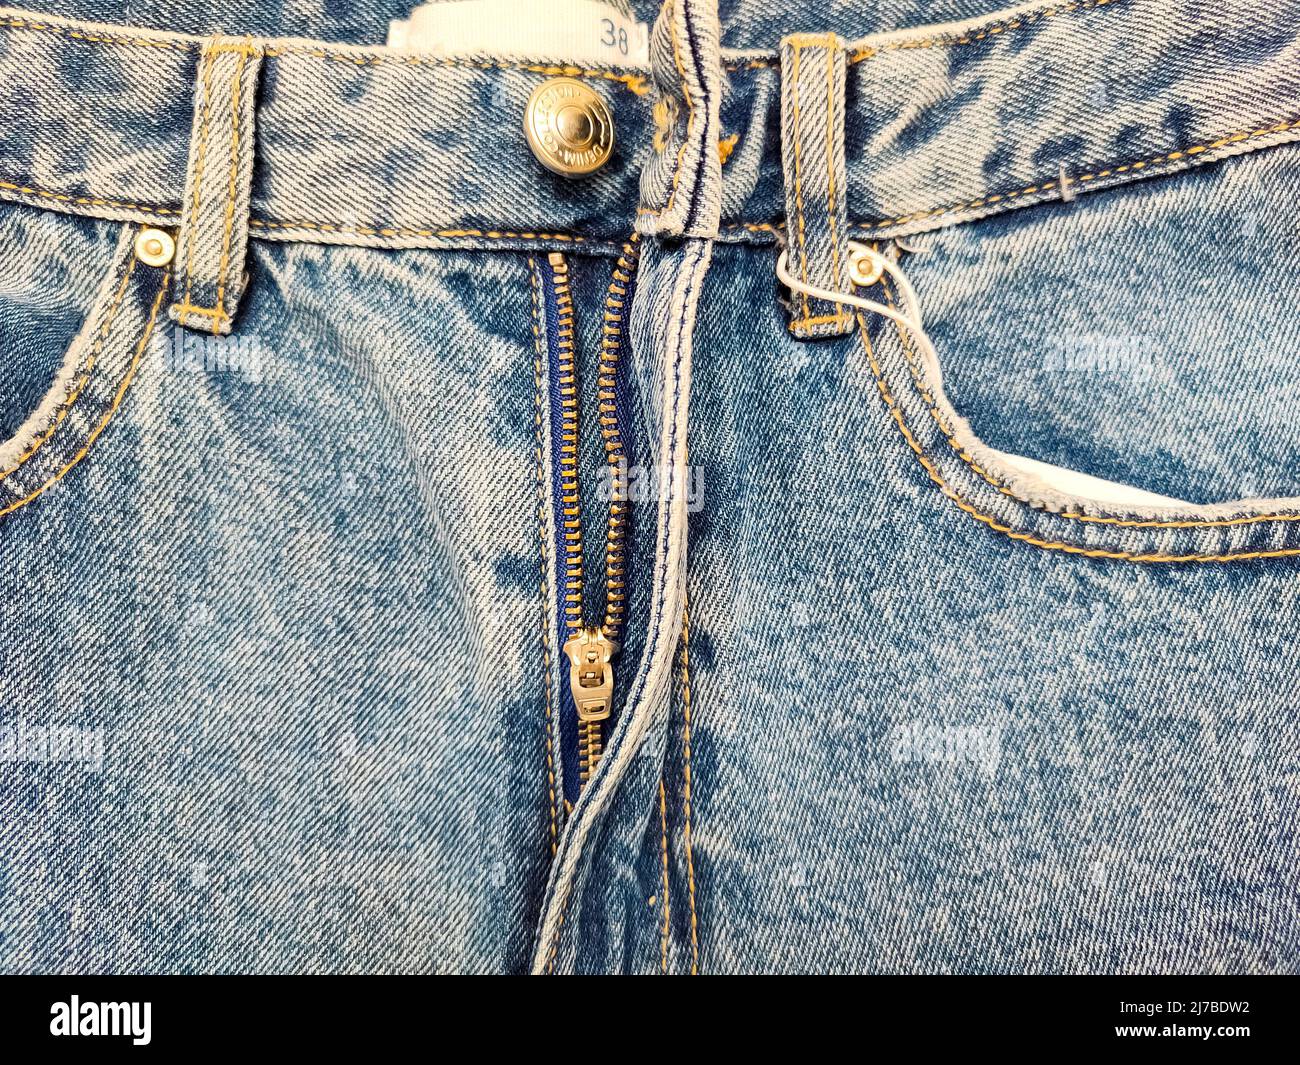 Finger sticking out of blue jeans fly open - a Royalty Free Stock